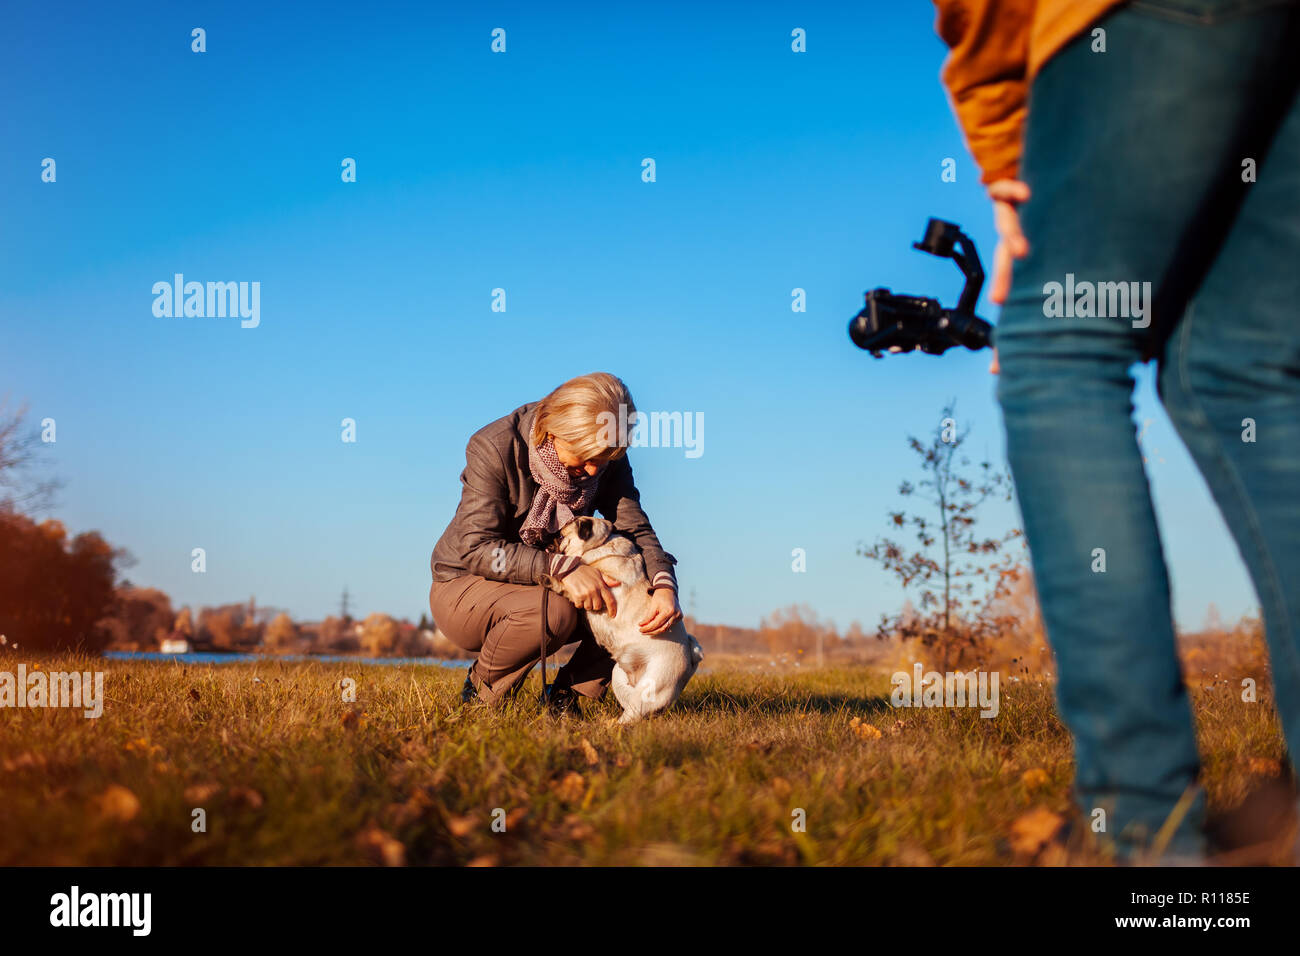 Videographer filming woman with dog in autumn park. Man using steadicam and camera to make footage. Video shoot Stock Photo